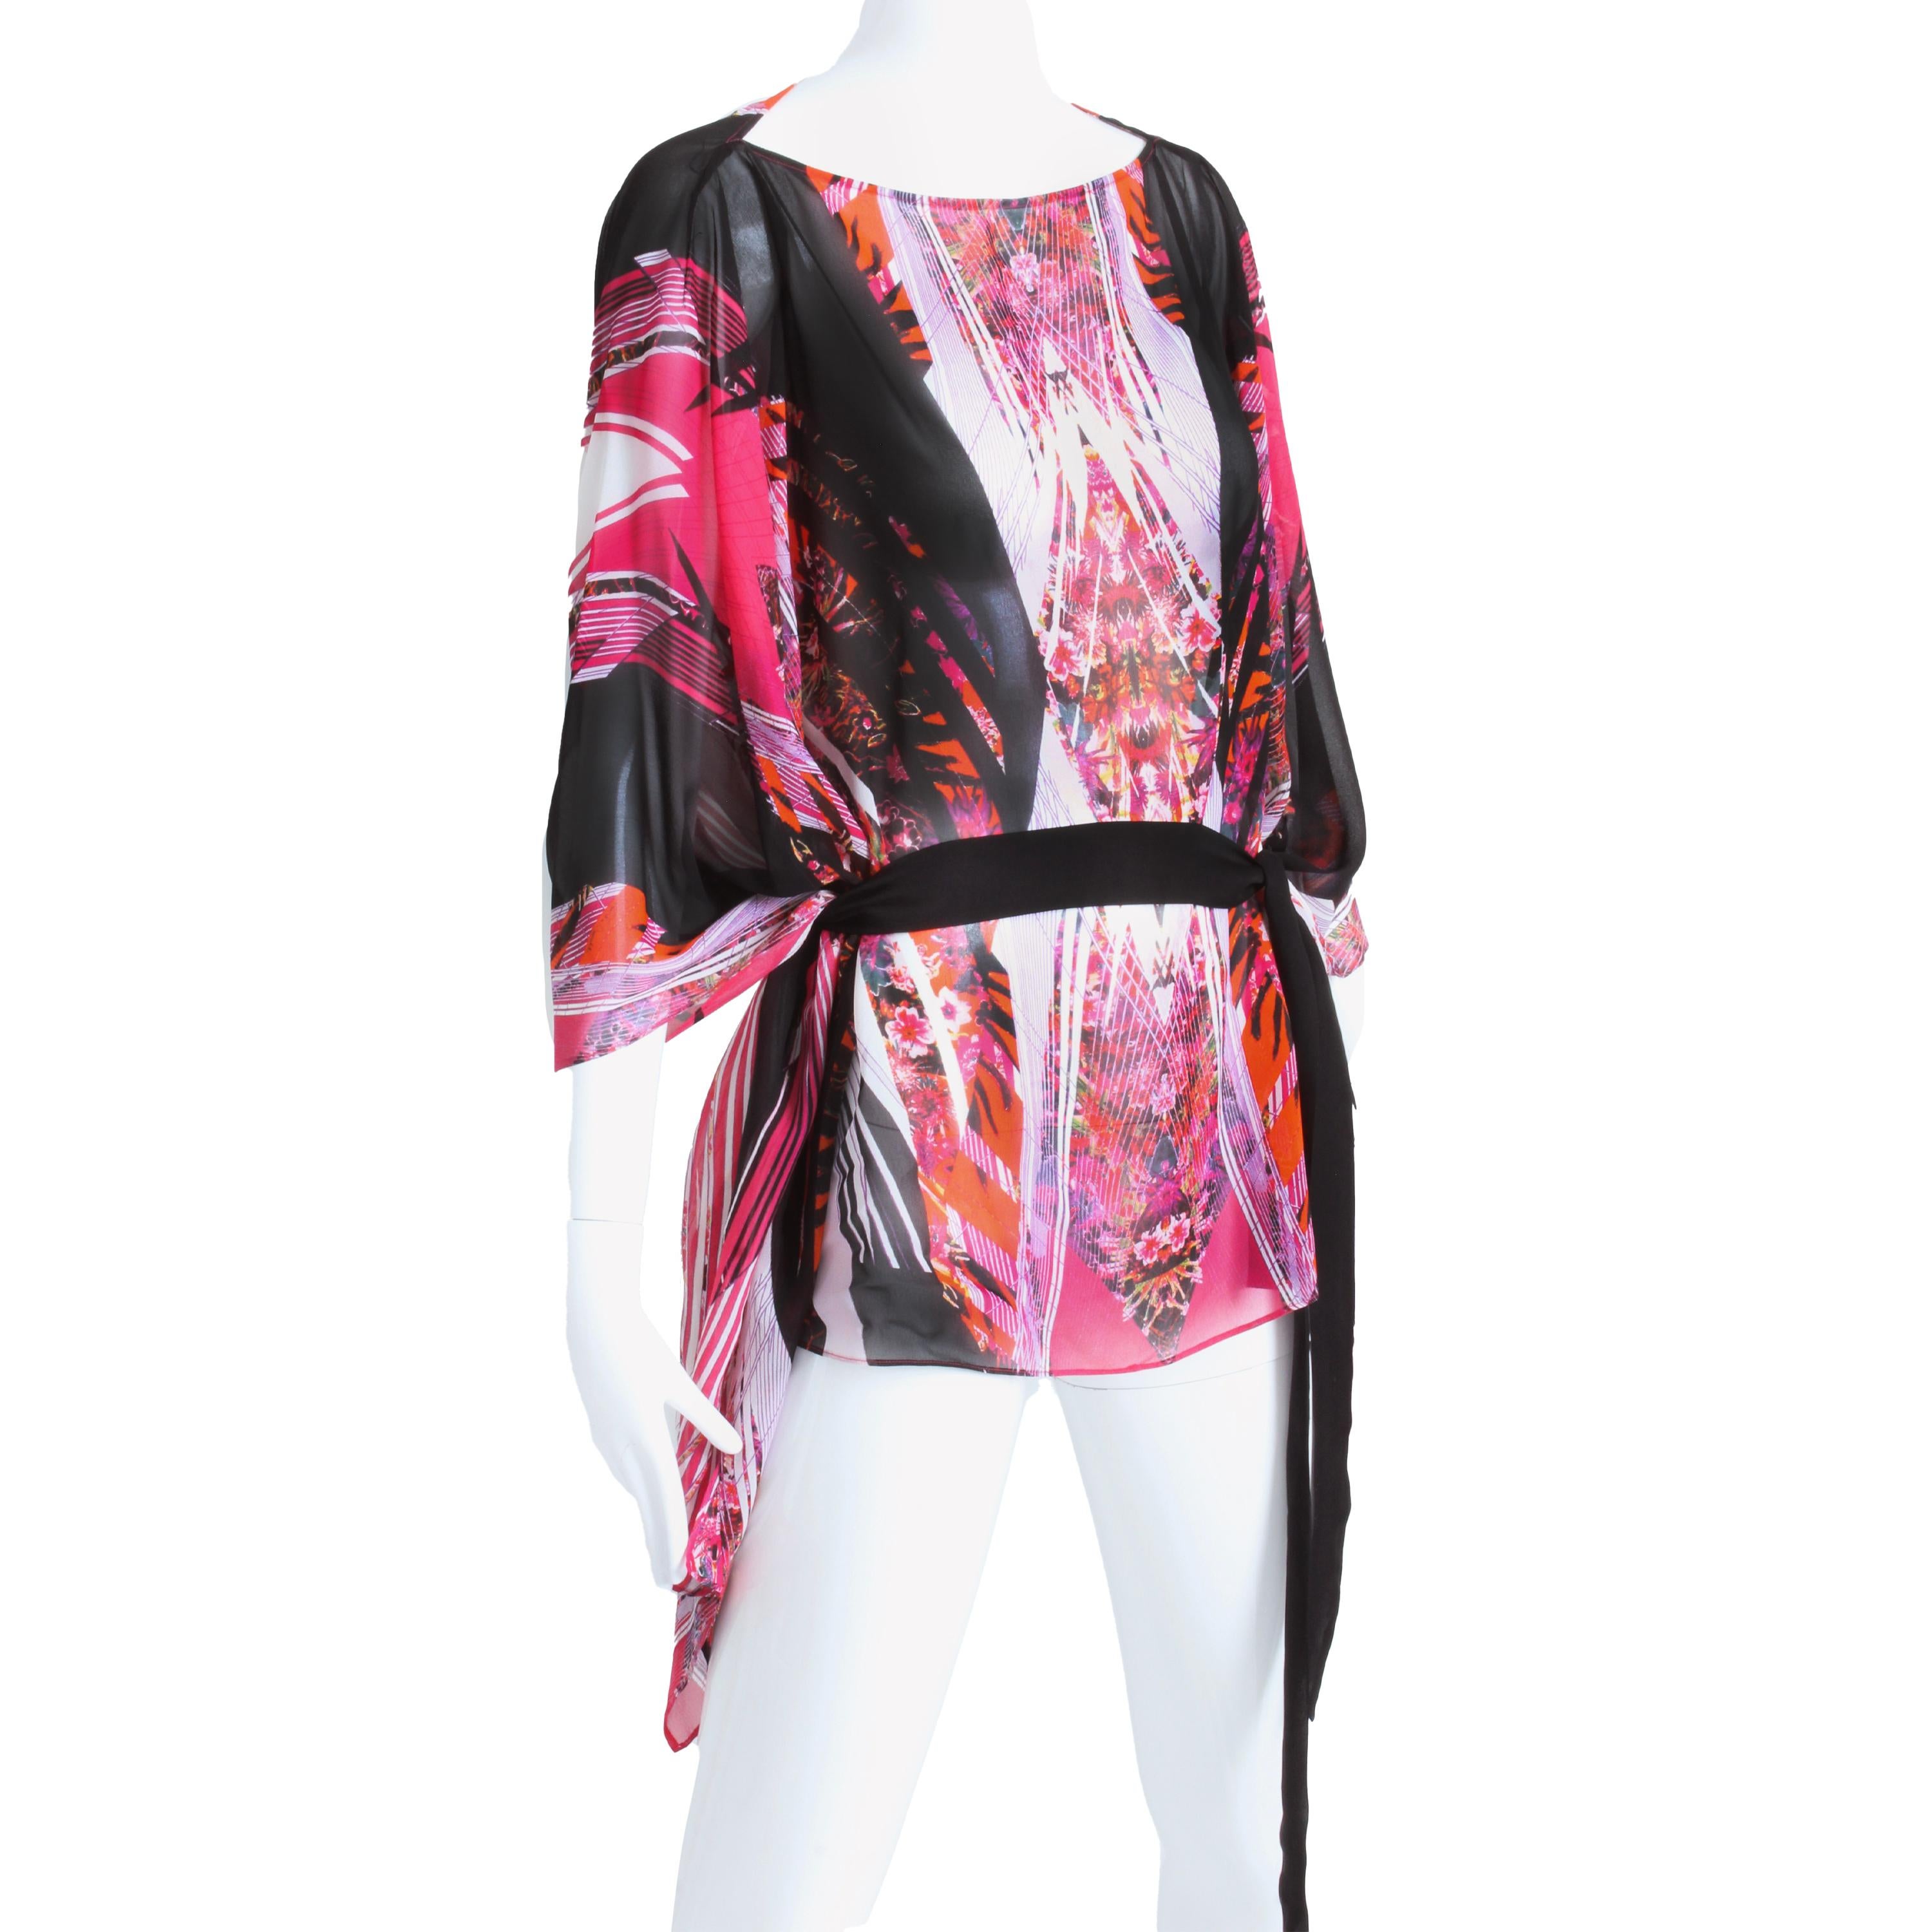 We love this vintage Roberto Cavalli silk caftan style blouse with belt, likely made in the early 2000s.  Made from a gorgeous silk chiffon fabric, it features a colorful abstract print in shades of pink, black and white.  Sheer and luxe, it comes